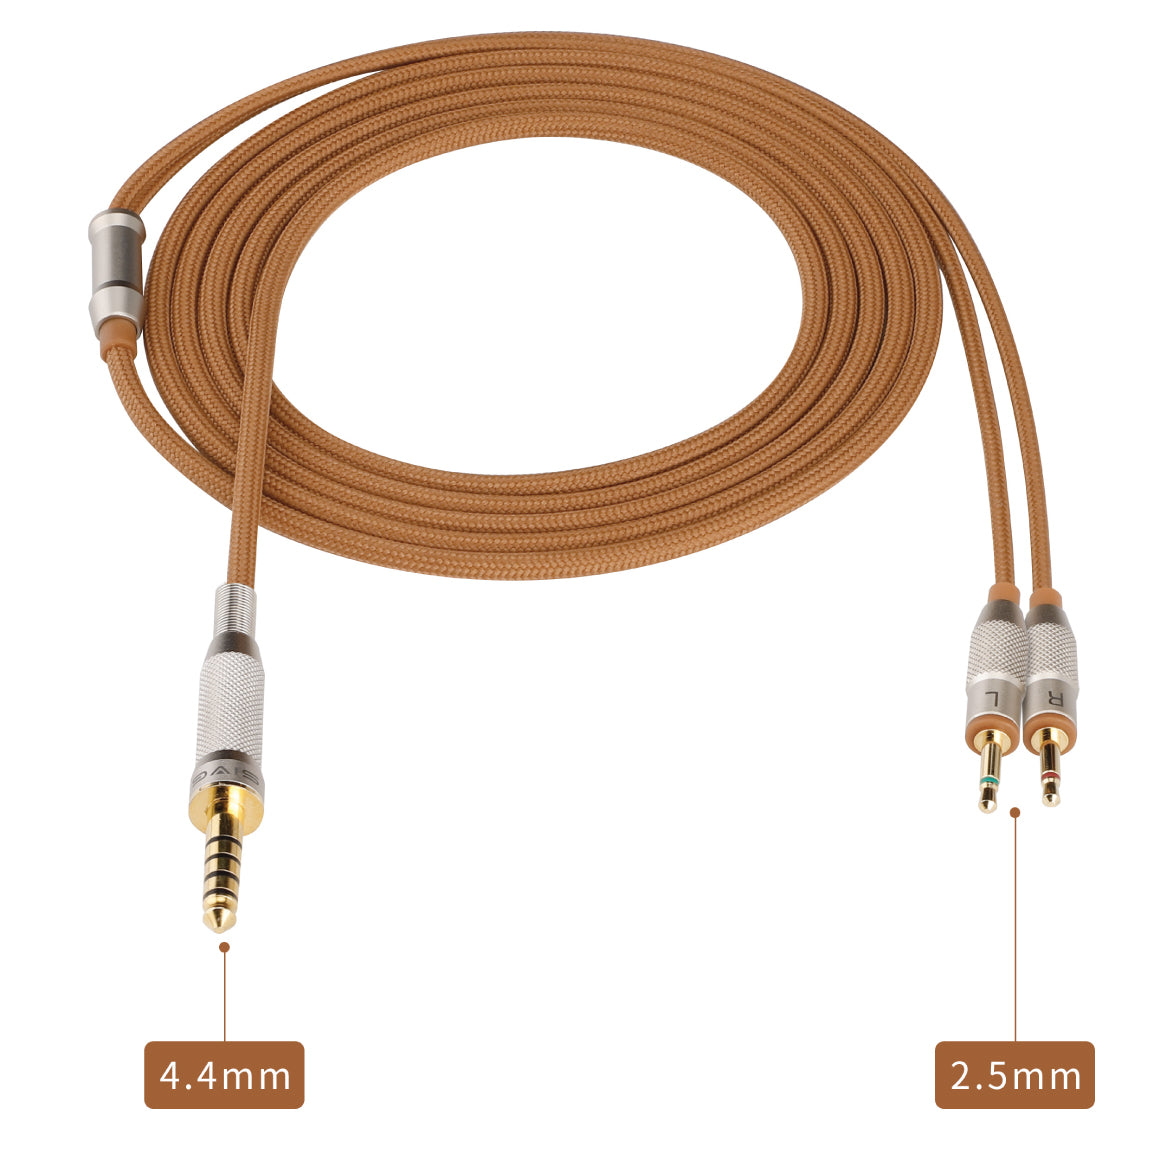 Headphone-Zone-SIVGA-Headphone-Cable-for-Robin-_SV021_-4.4mm-Brown